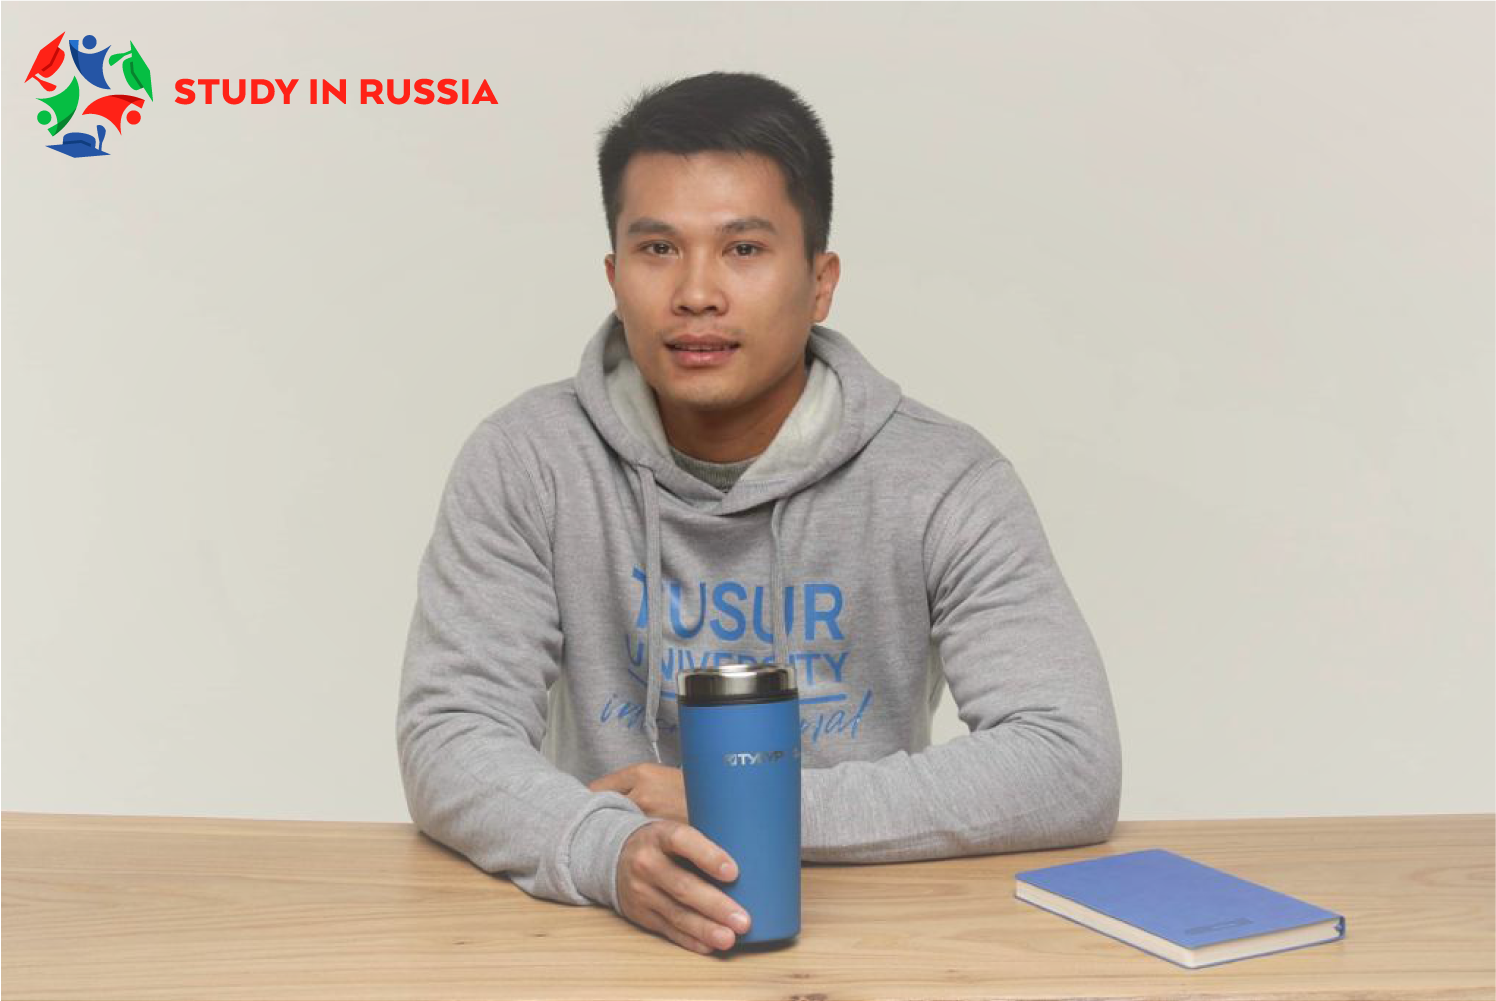 “I like the way life of postgraduates is organized in the university”: Vietnamese postgraduate student Chan Van Tu speaks about studying in Russia